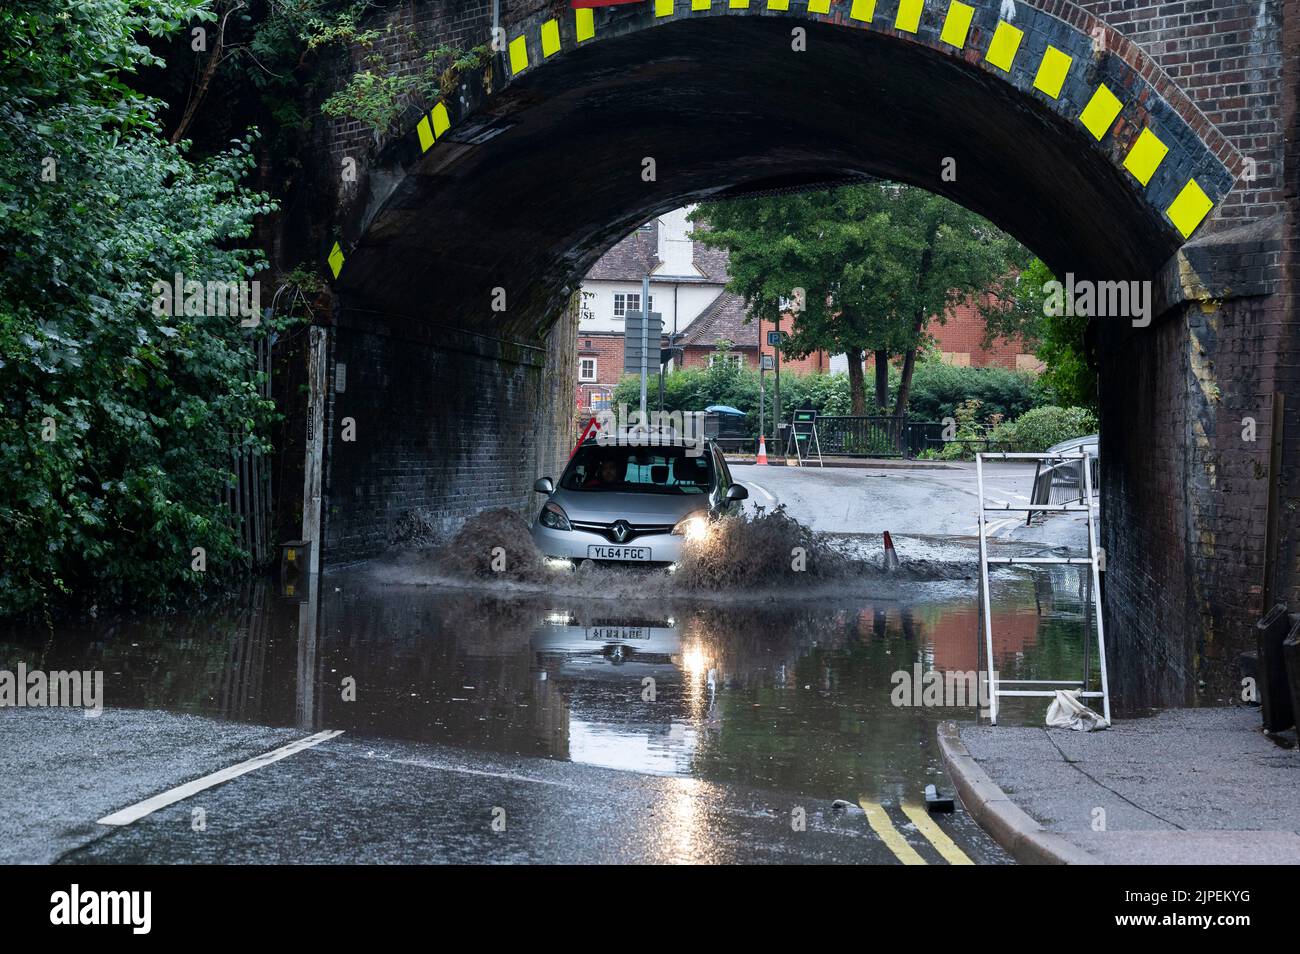 Haslemere, UK, Wednesday, 17th August 2022. A car drives under a railway bridge through a large flood after torrential rainfall brings the summer heatwave to an end, Weyhill, Haslemere, Surrey.  Credit: DavidJensen / Empics Entertainment / Alamy Live News Stock Photo